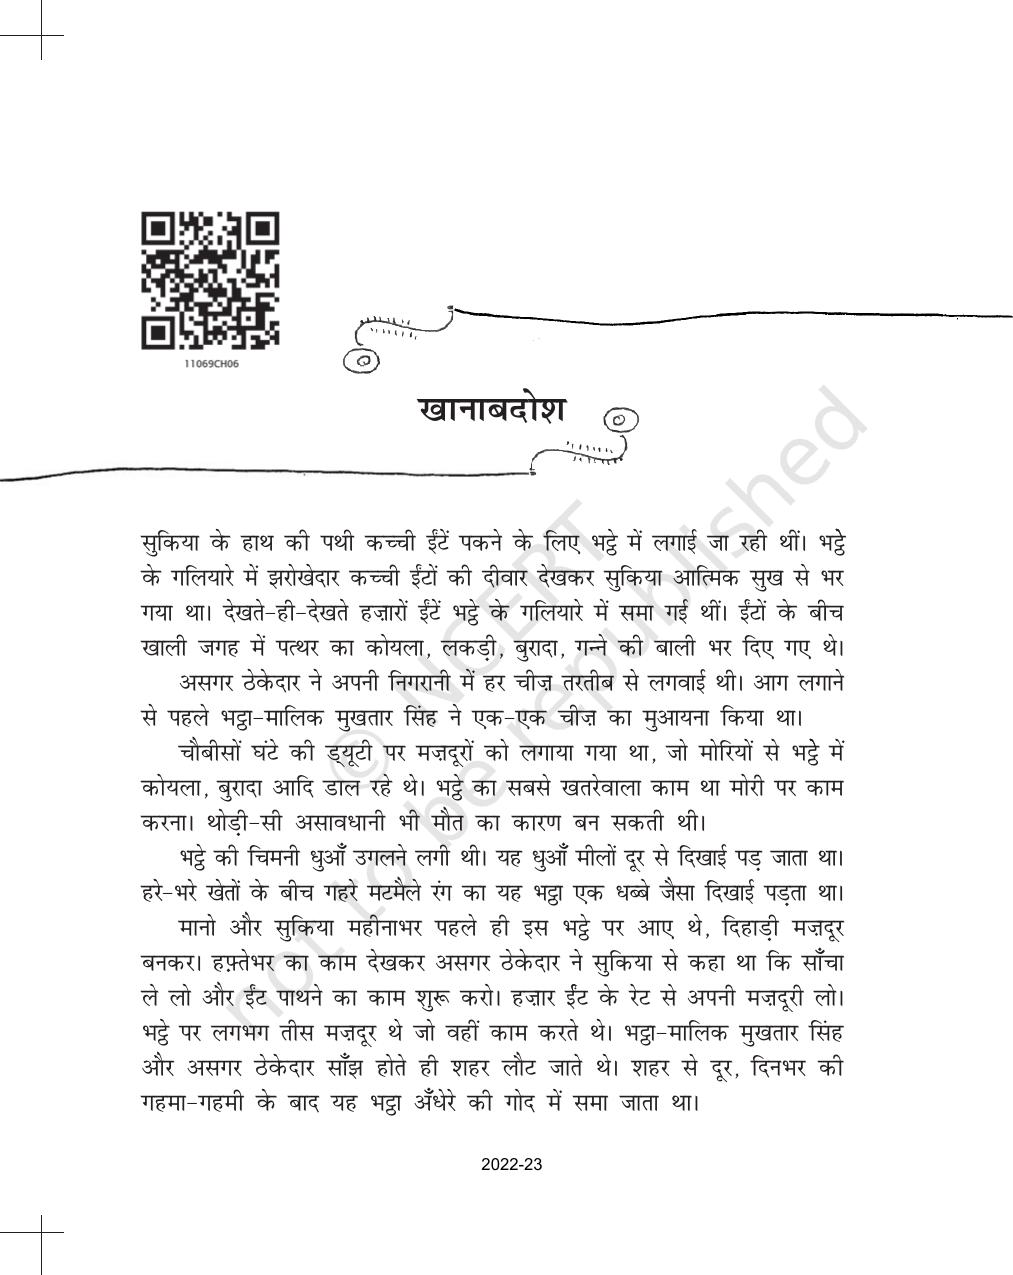 NCERT Book for Class 11 Hindi Antra Chapter 6 खानाबदोश - Page 3